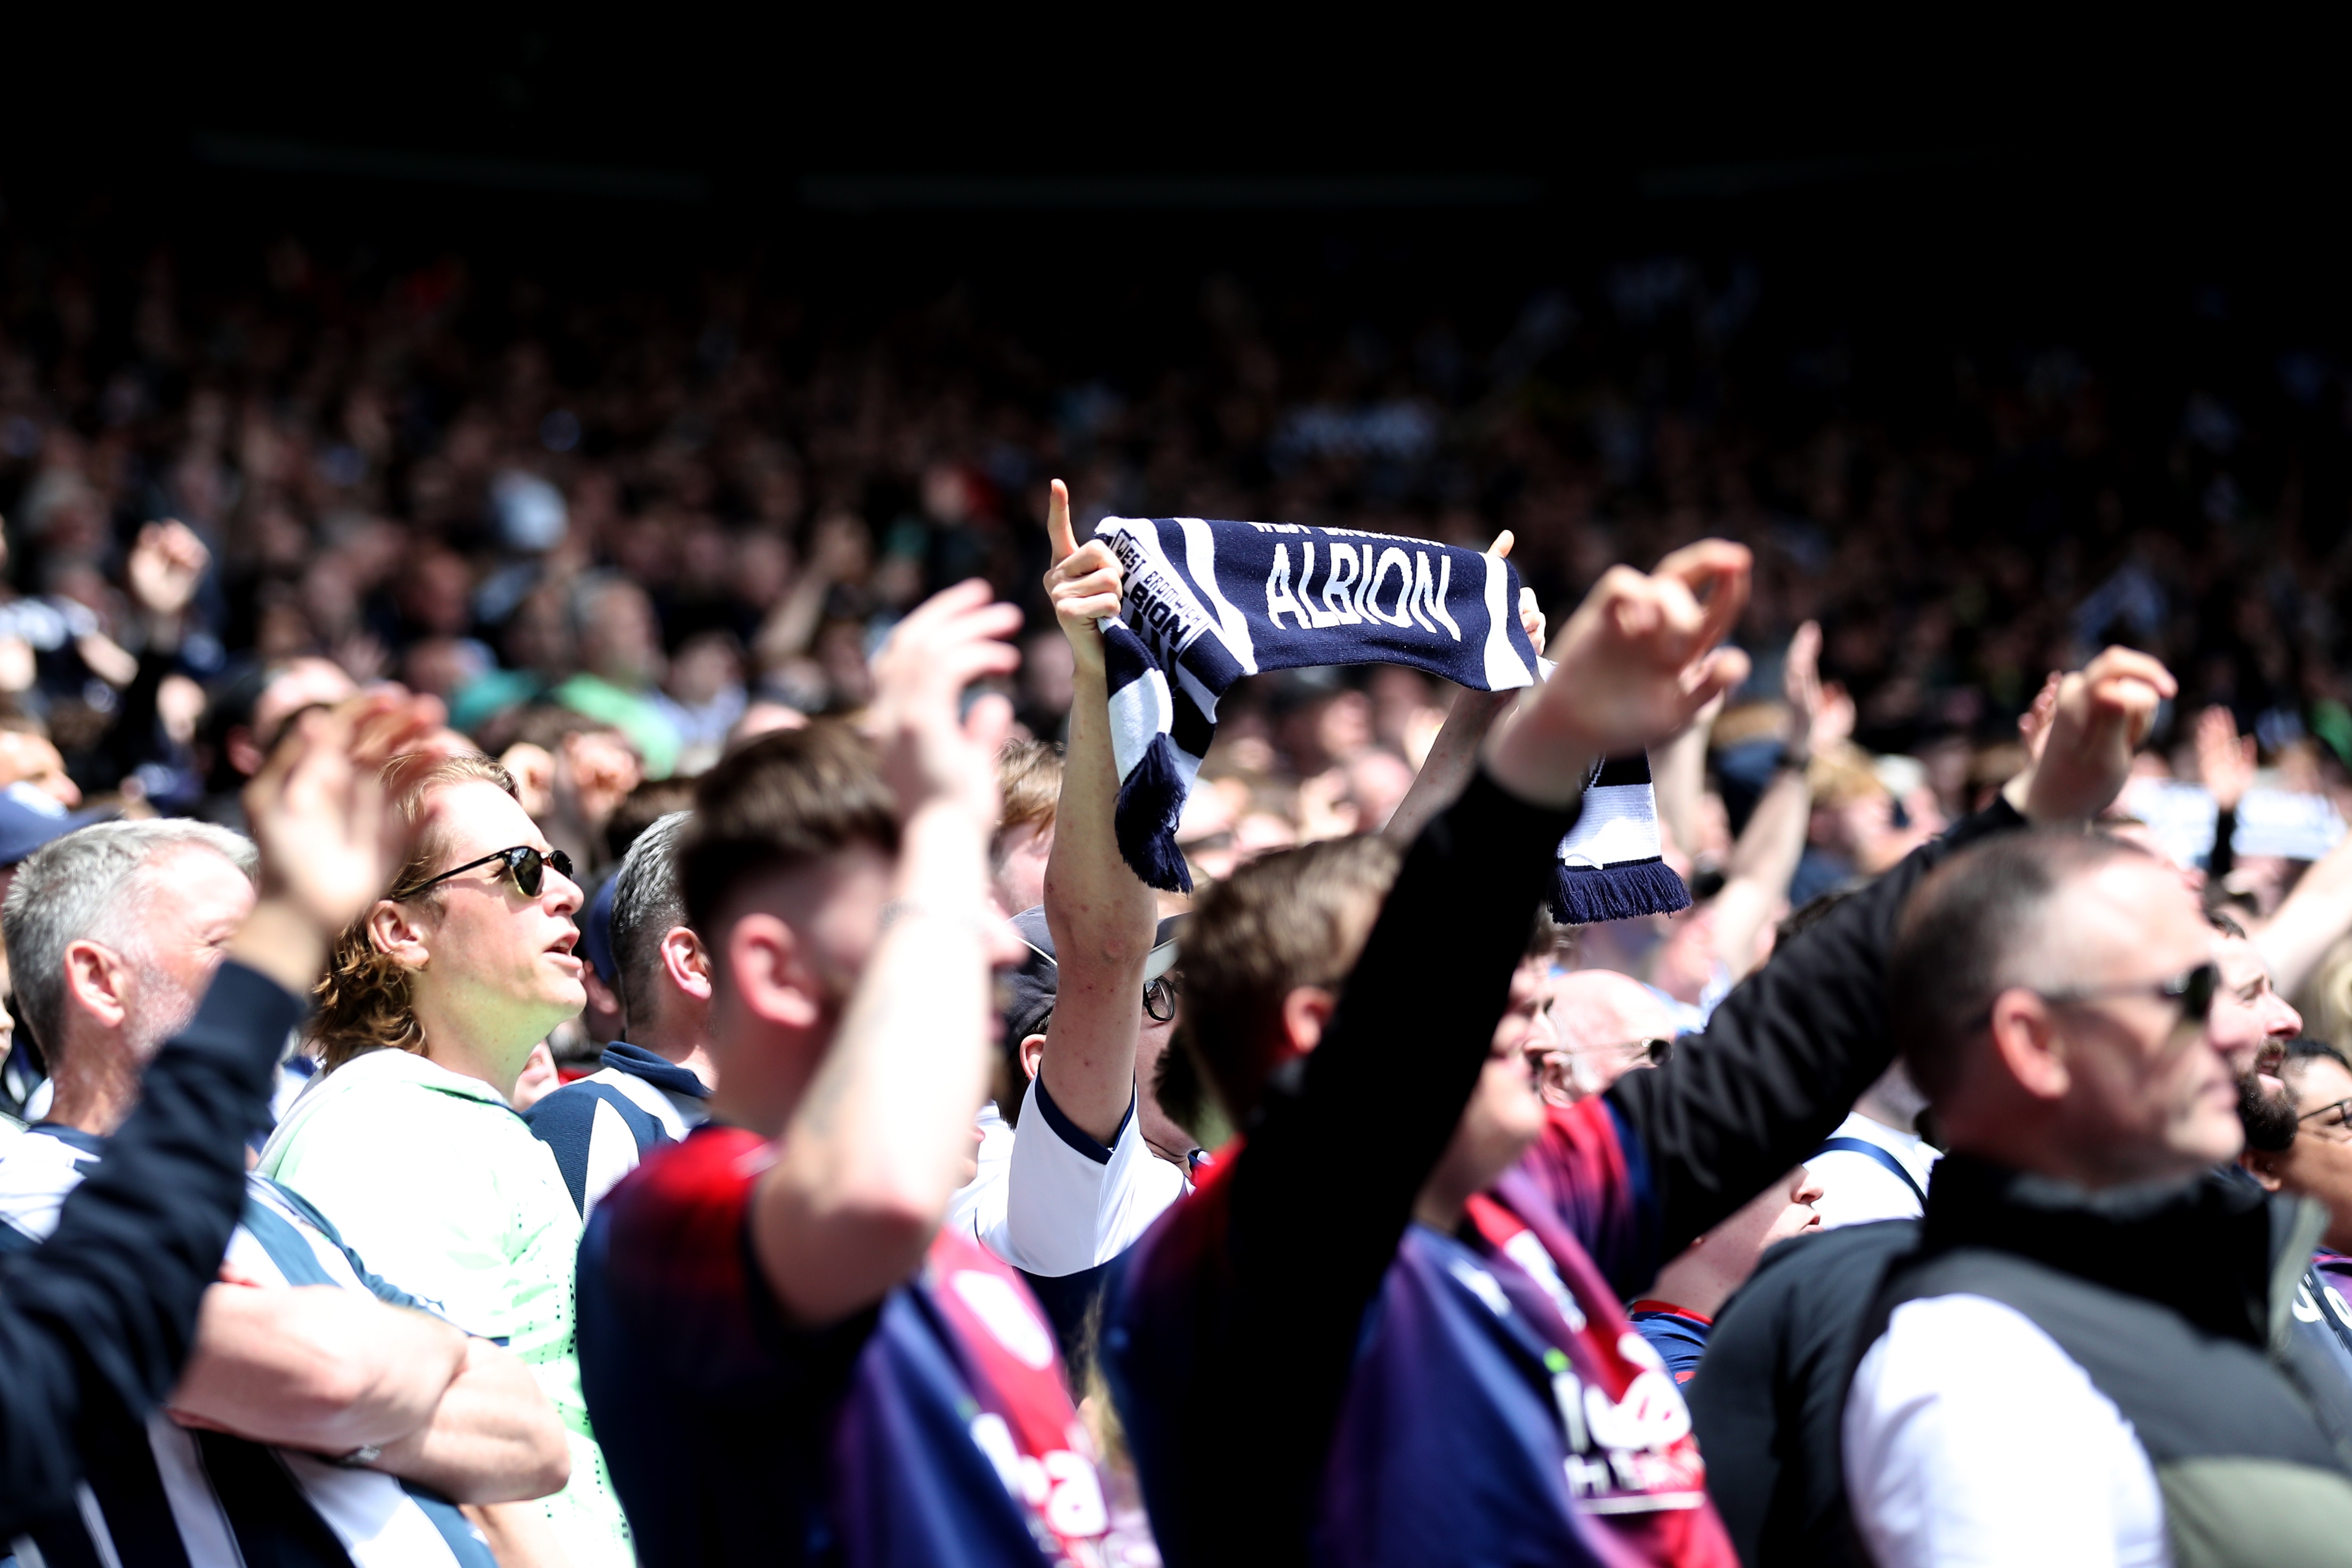 An Albion fan holding up a scarf at the Preston game 